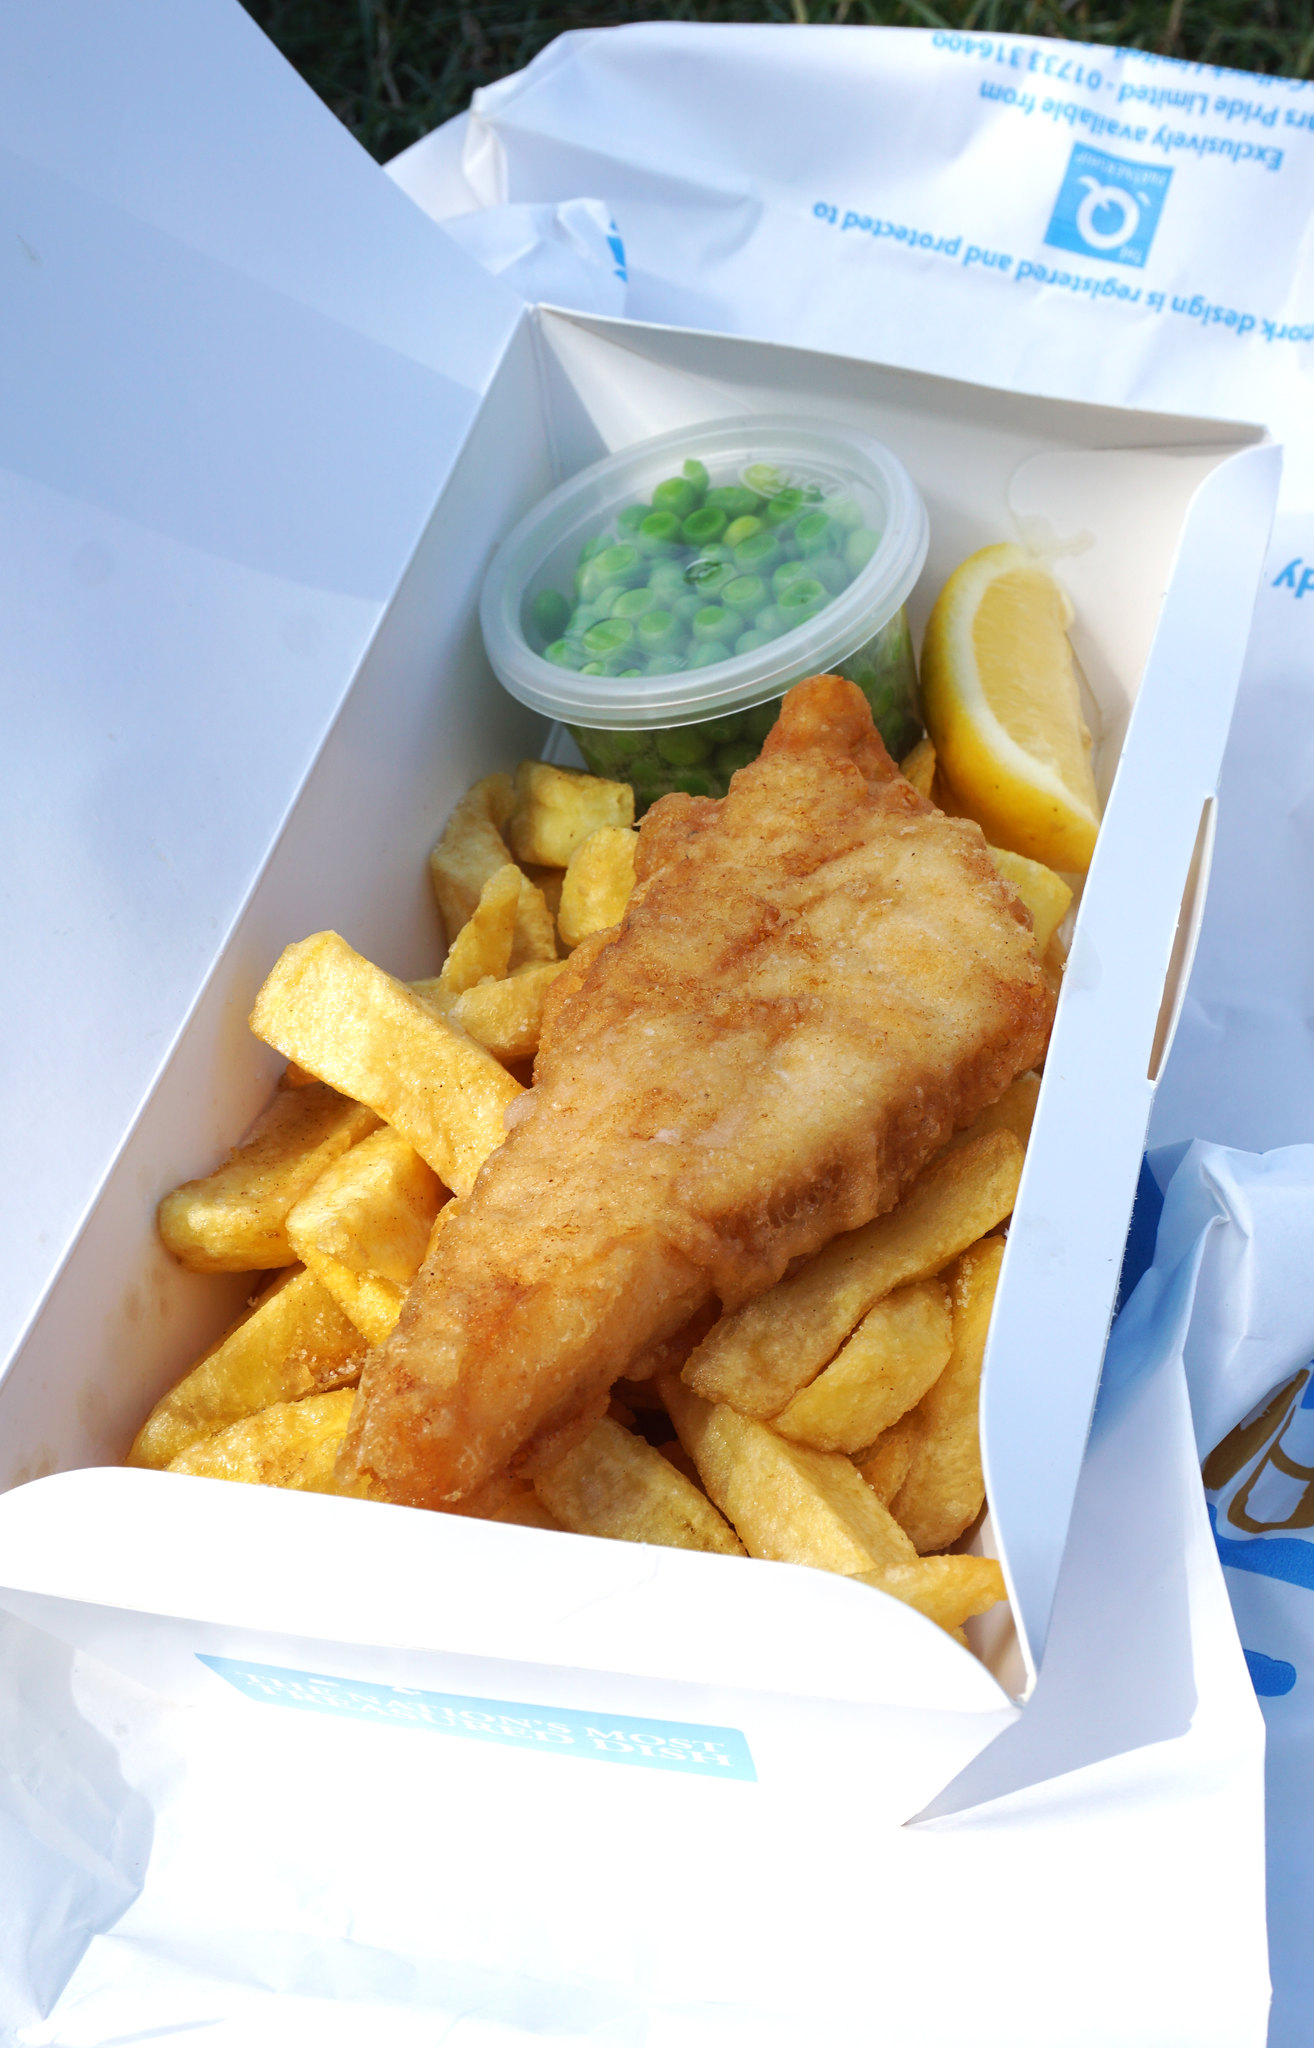 gluten free fish, chips and peas from Olley's Fish Experience in Brixton/Herne Hill, London